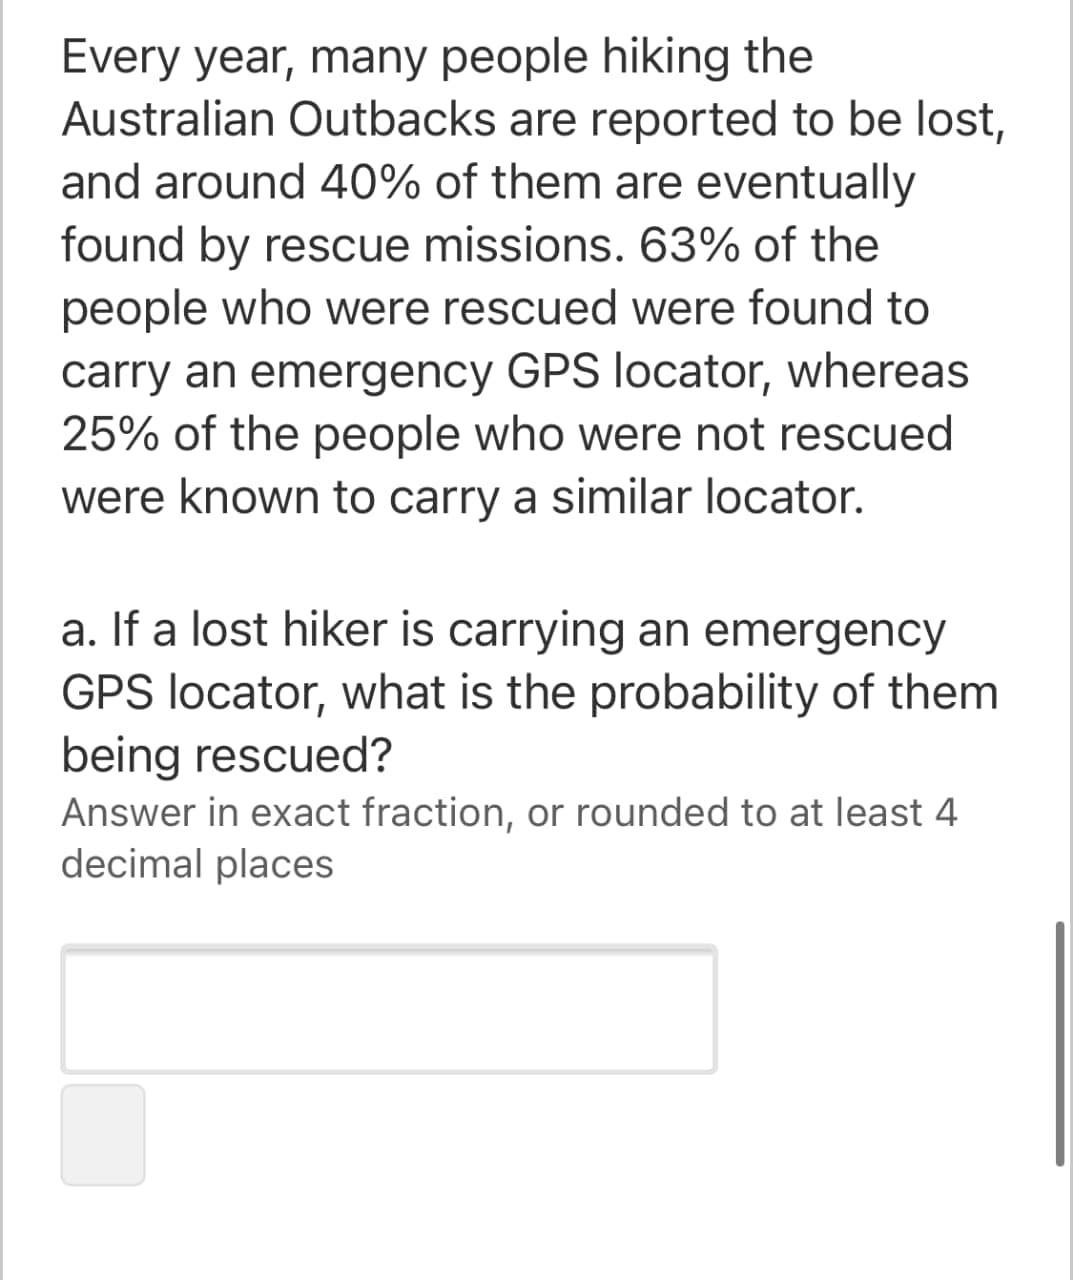 Every year, many people hiking the
Australian Outbacks are reported to be lost,
and around 40% of them are eventually
found by rescue missions. 63% of the
people who were rescued were found to
carry an emergency GPS locator, whereas
25% of the people who were not rescued
were known to carry a similar locator.
a. If a lost hiker is carrying an emergency
GPS locator, what is the probability of them
being rescued?
Answer in exact fraction, or rounded to at least 4
decimal places
